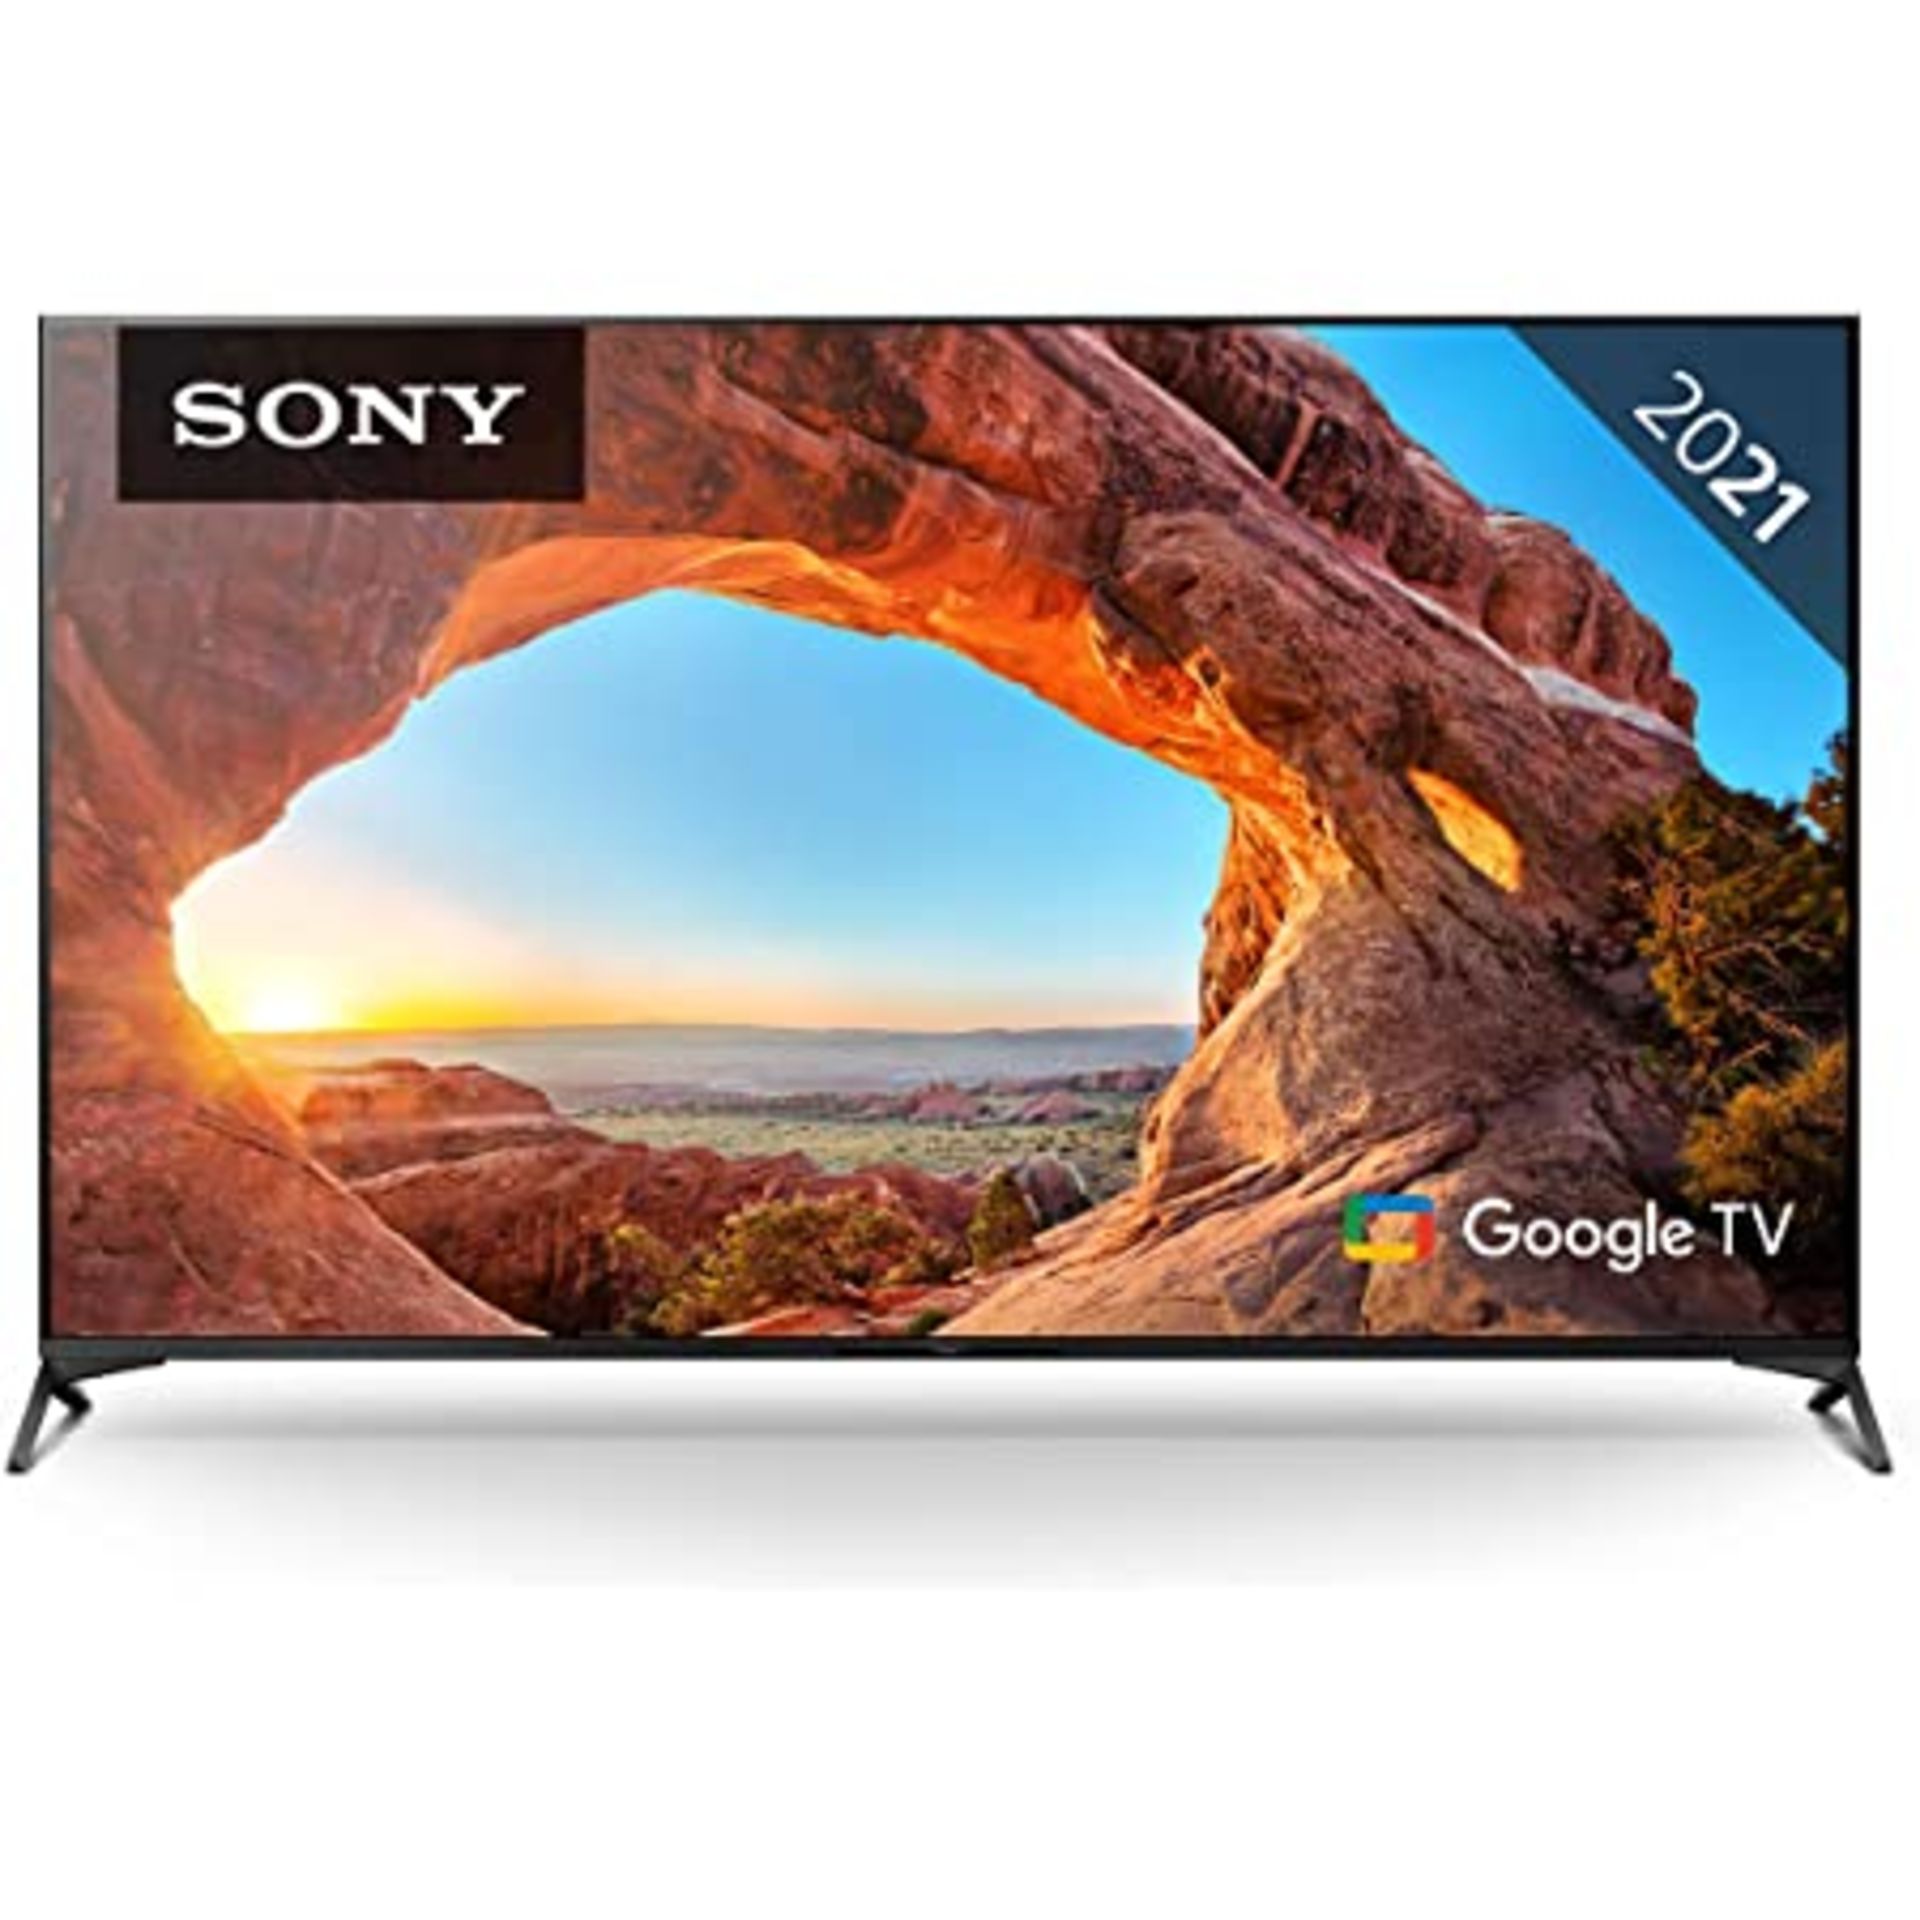 1 SONY BRAVIA KD-55X89J, 55 INCH, LED, 4K ULTRA HD, HDR, GOOGLE TV WITH REMOTE RRP Â£699 (WORKING,